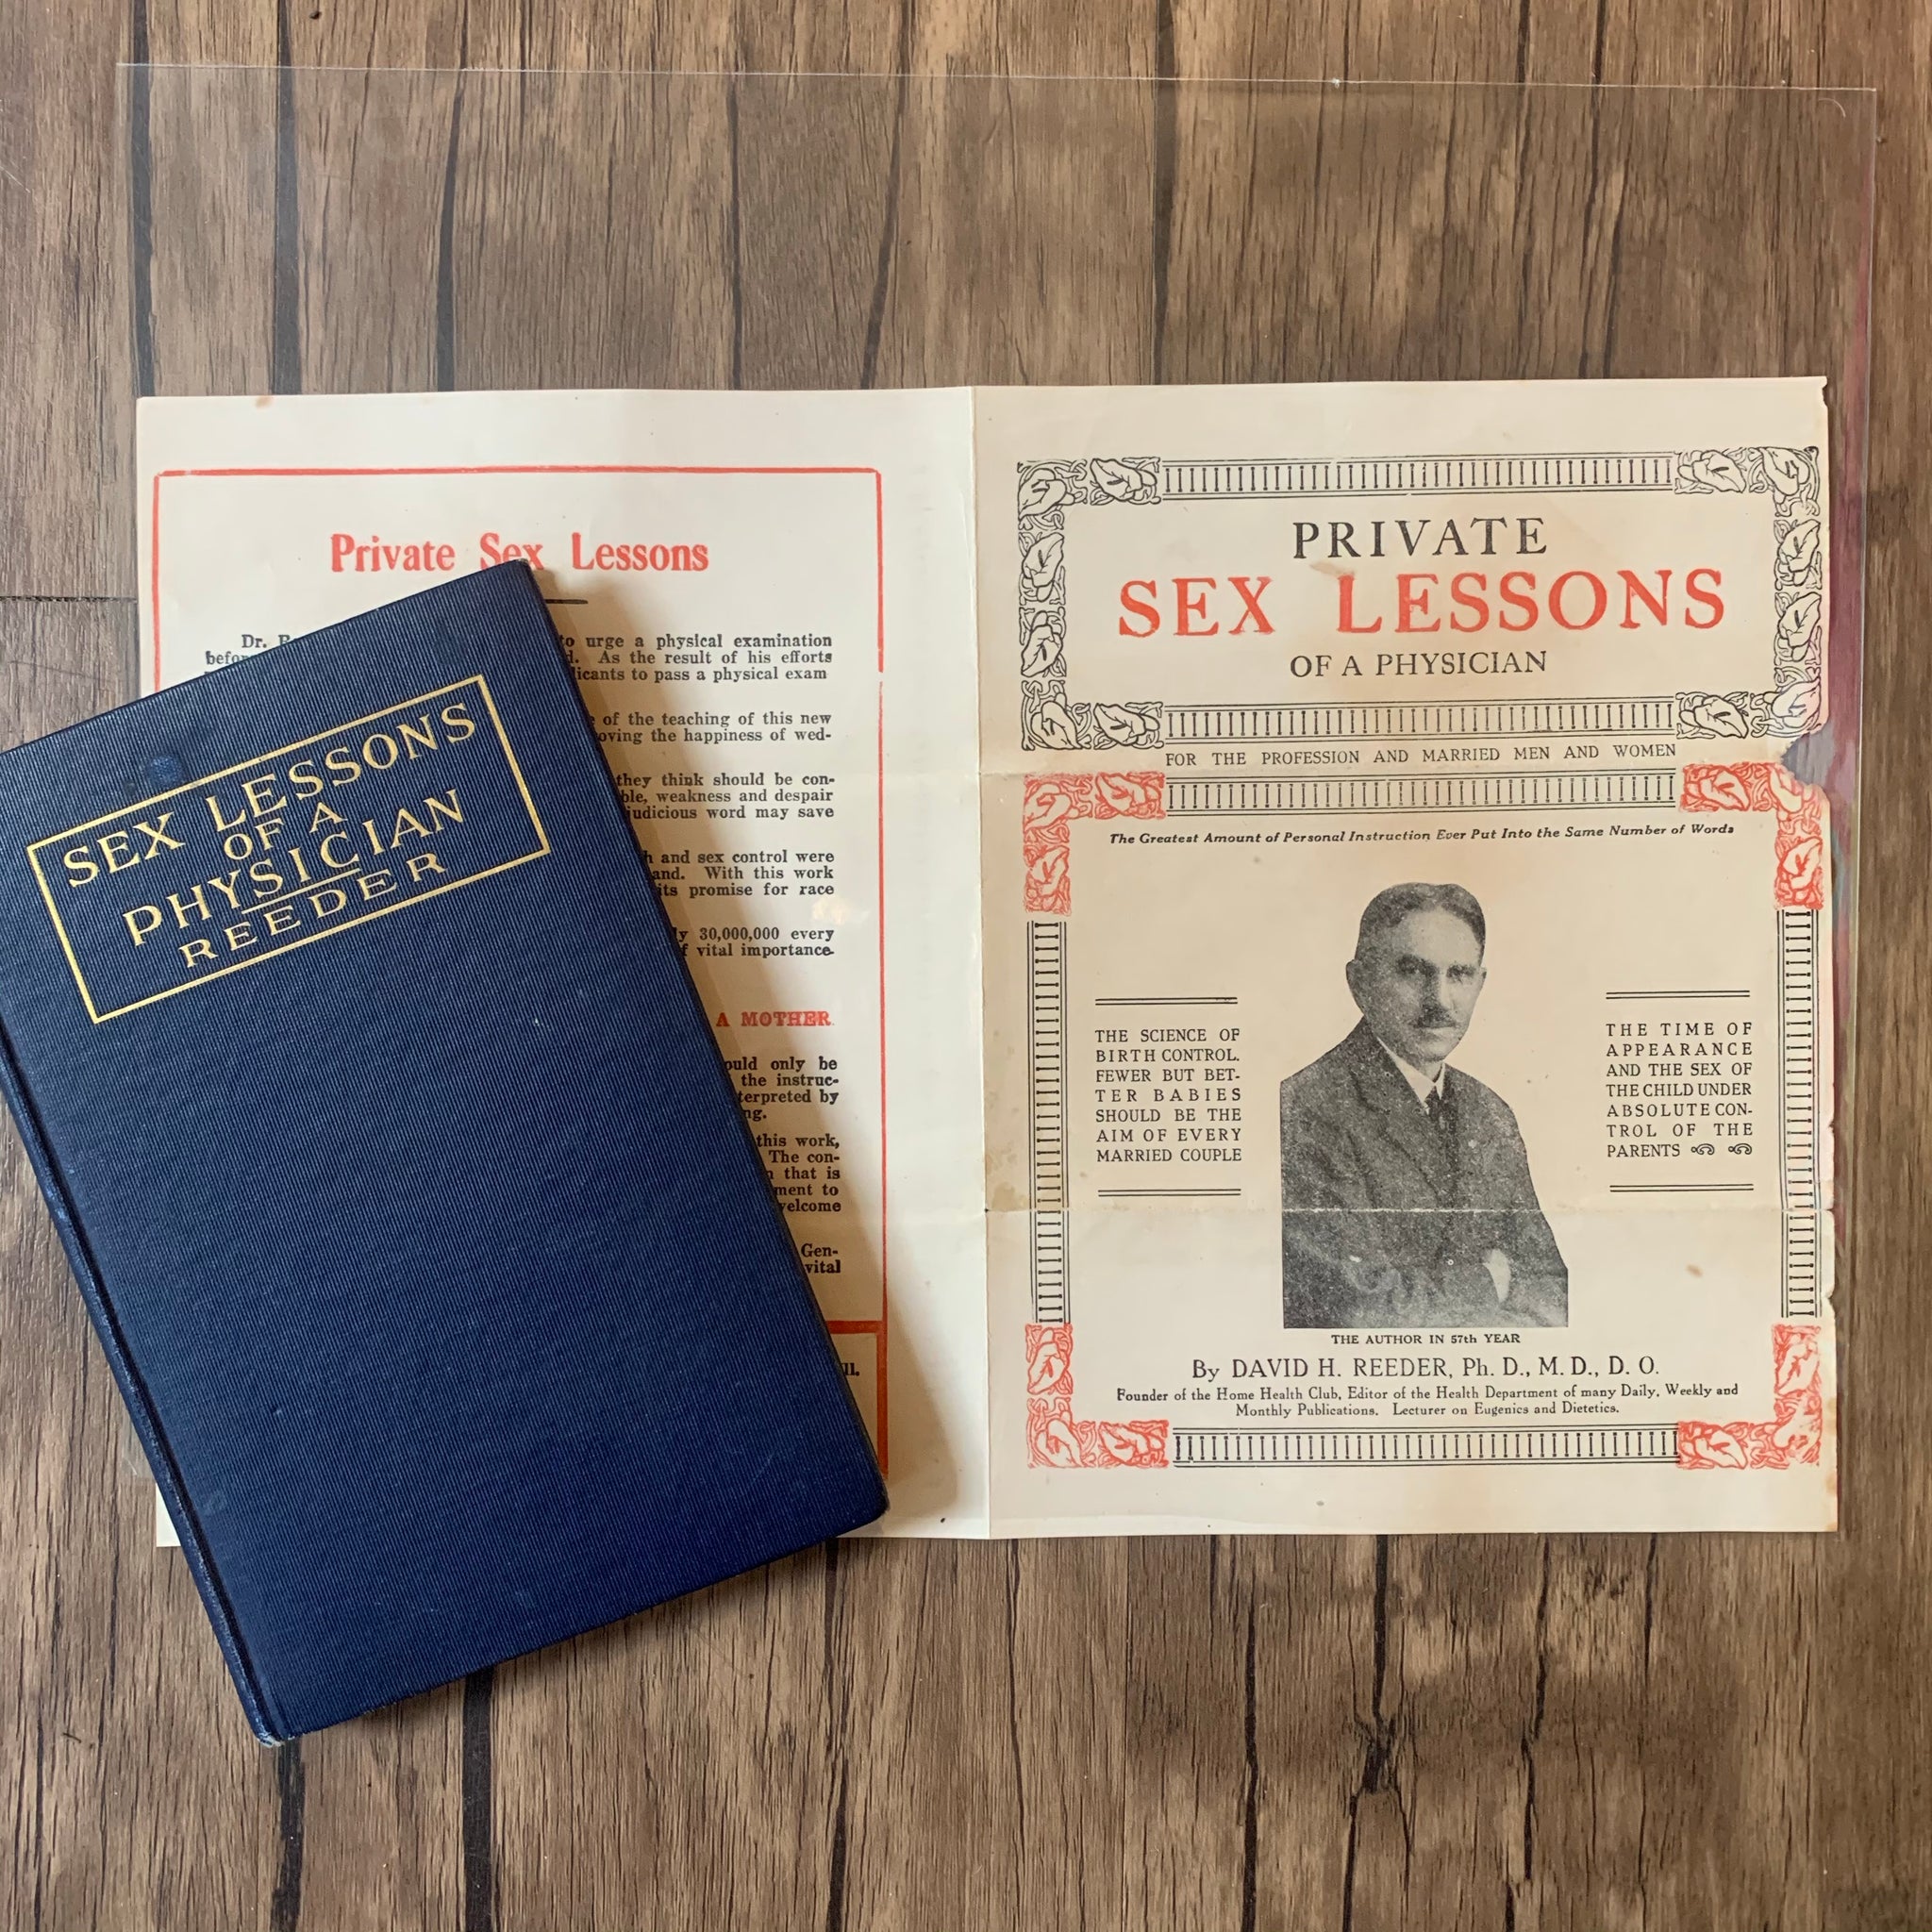 Private Sex Lessons of a Physician advertisement and book by David H. Reeder